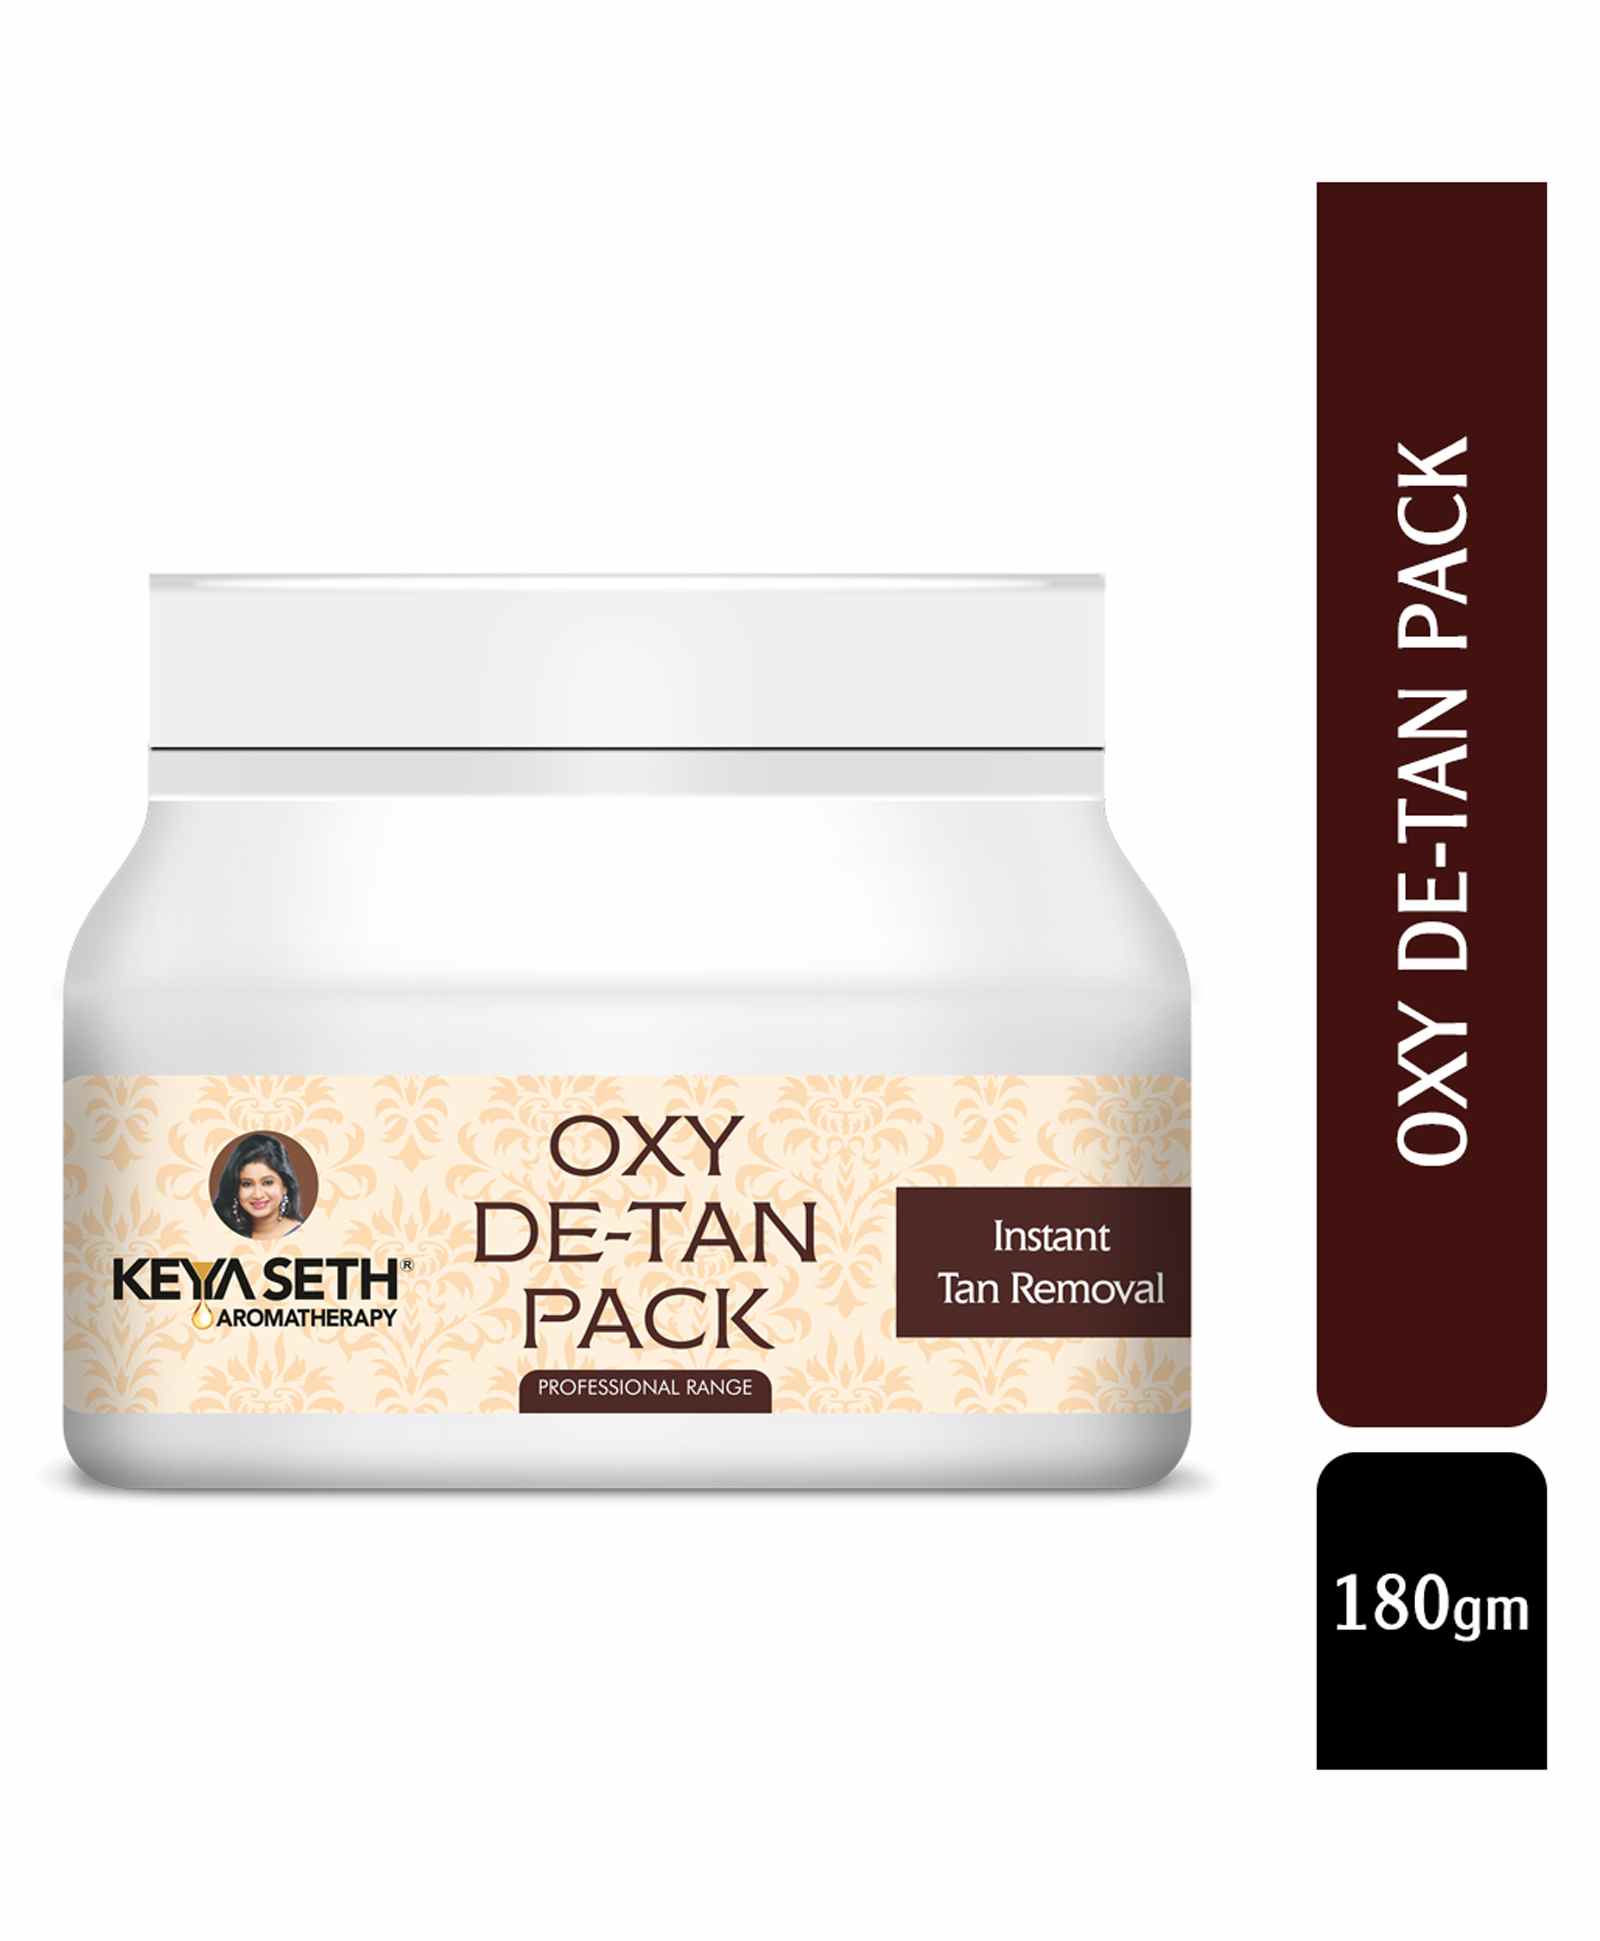 Keya Seth Aromatherapy Oxy De Tan Instant Tan Removal Pack - 180 gm Online  in India, Buy at Best Price from  - 9276989